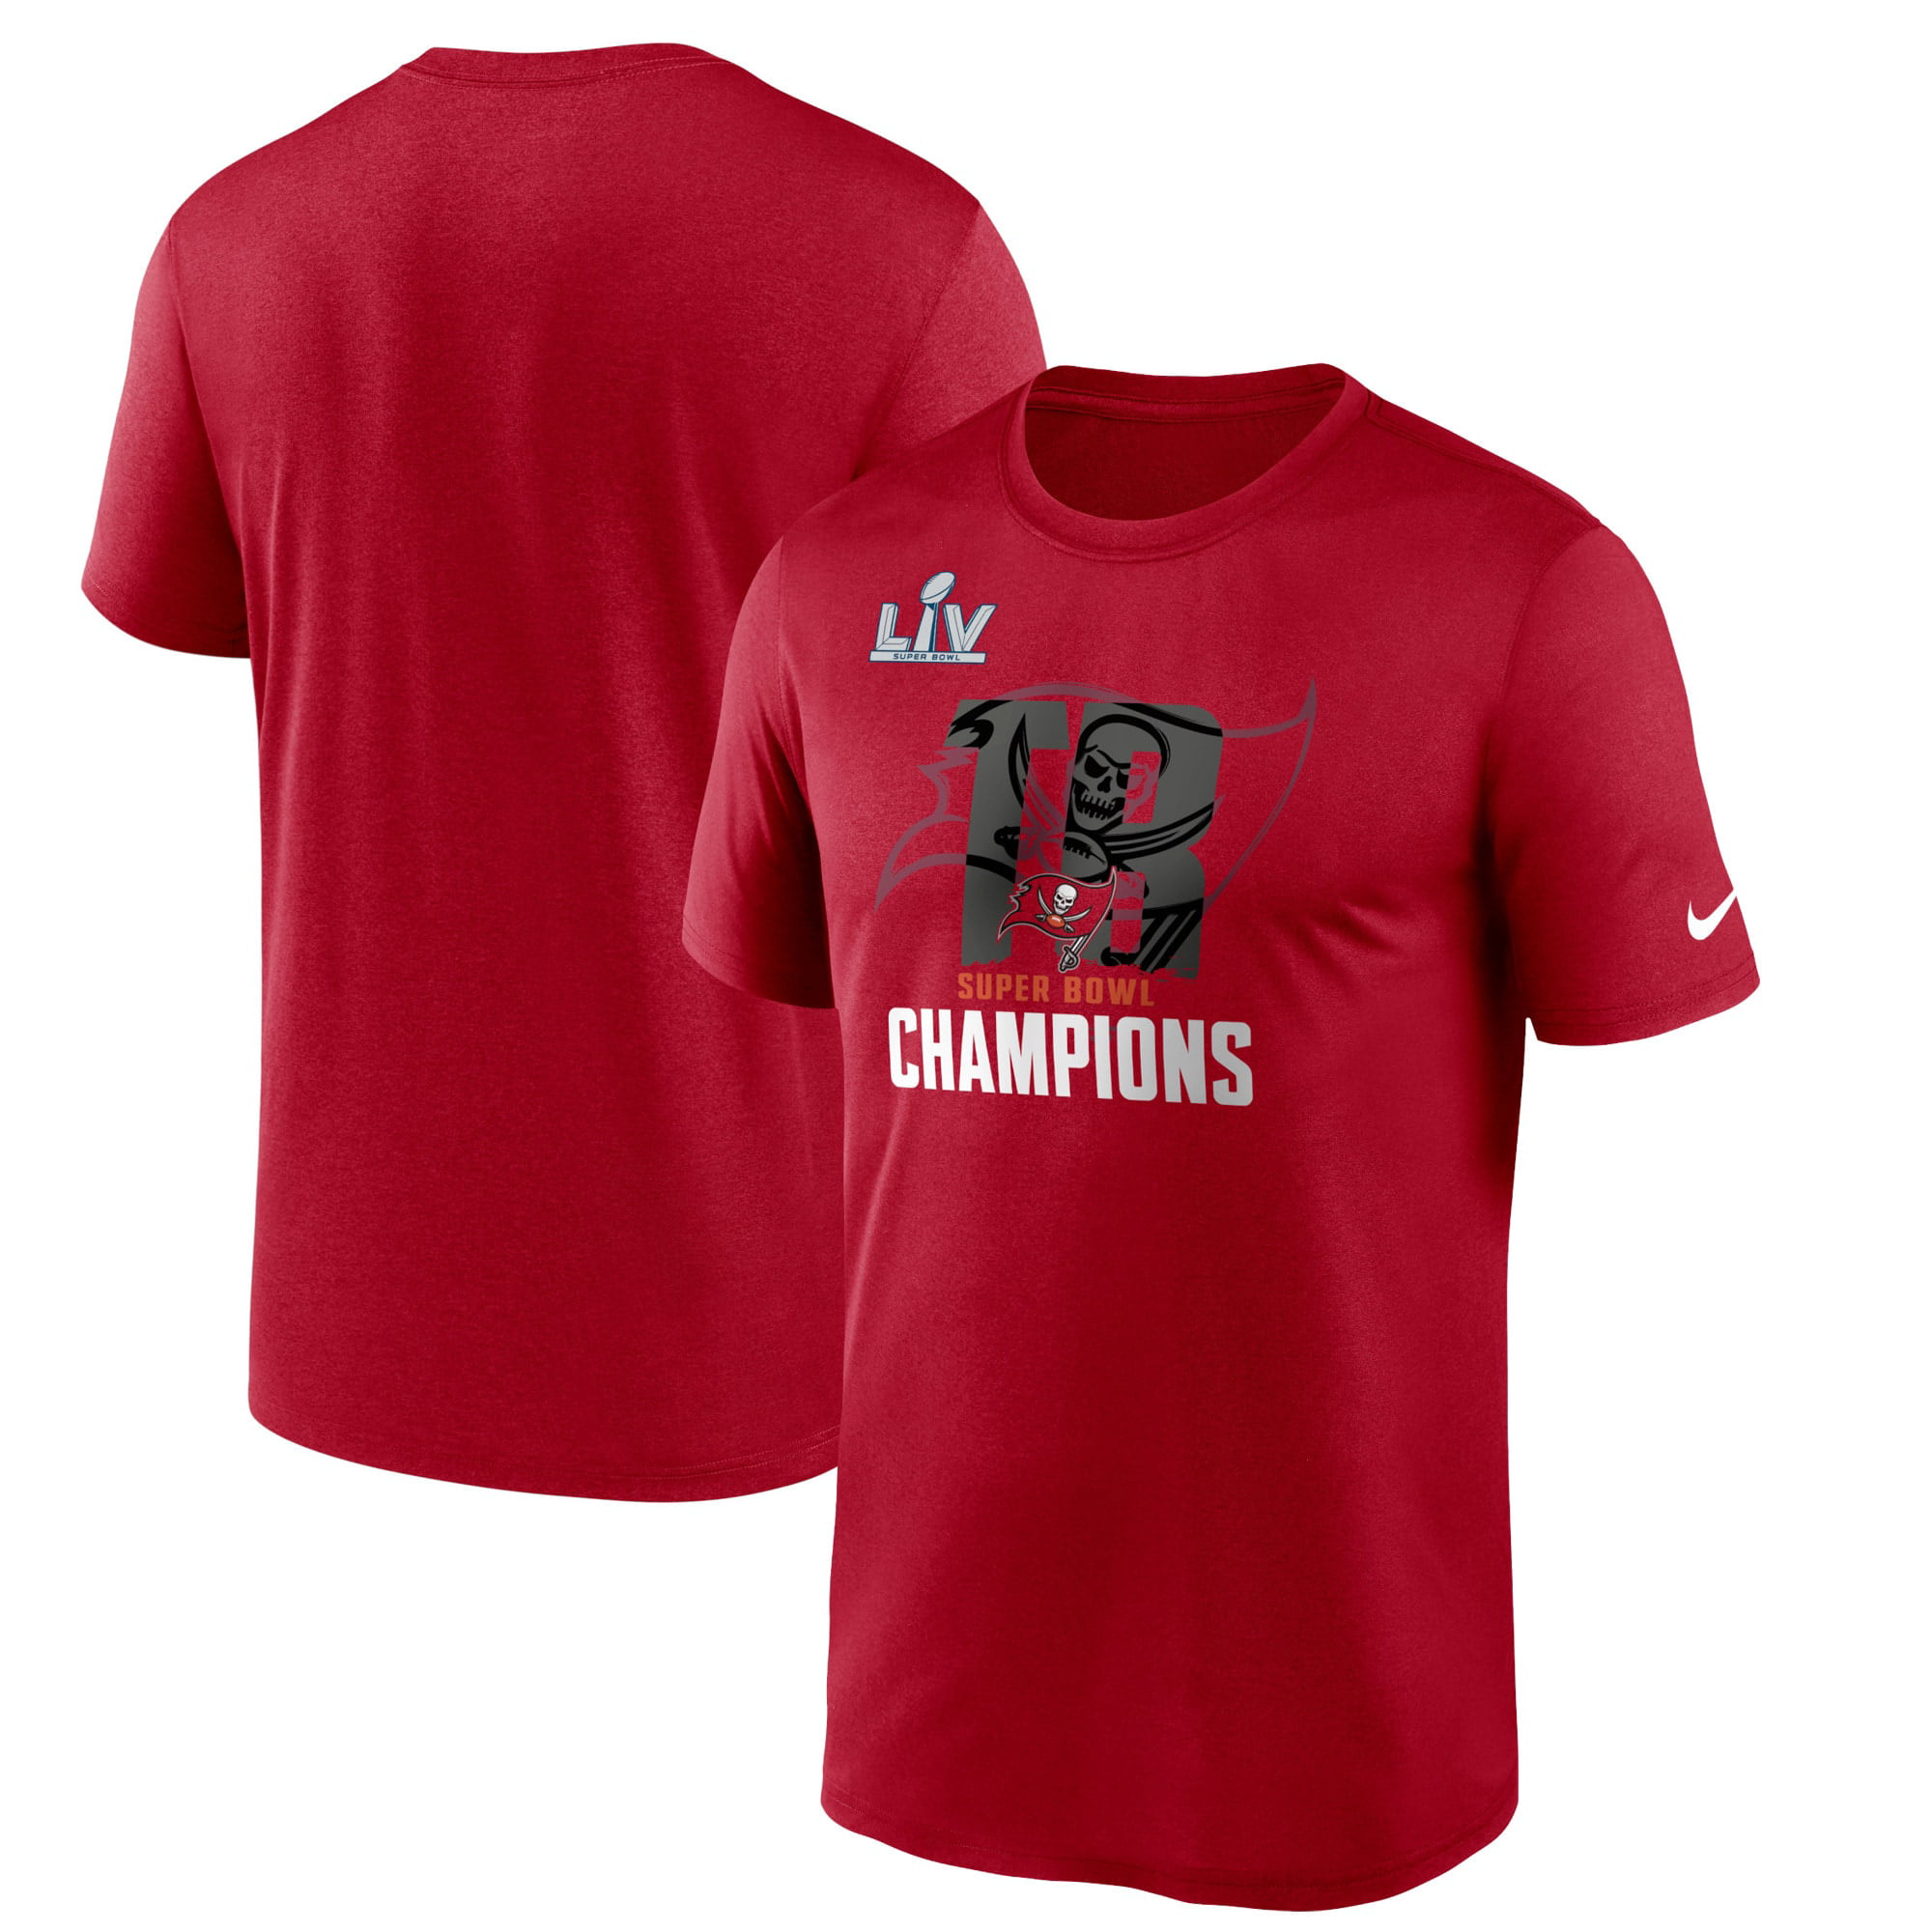 Men's Nike Red Tampa Bay Buccaneers Super Bowl LV Champions Local T-Shirt